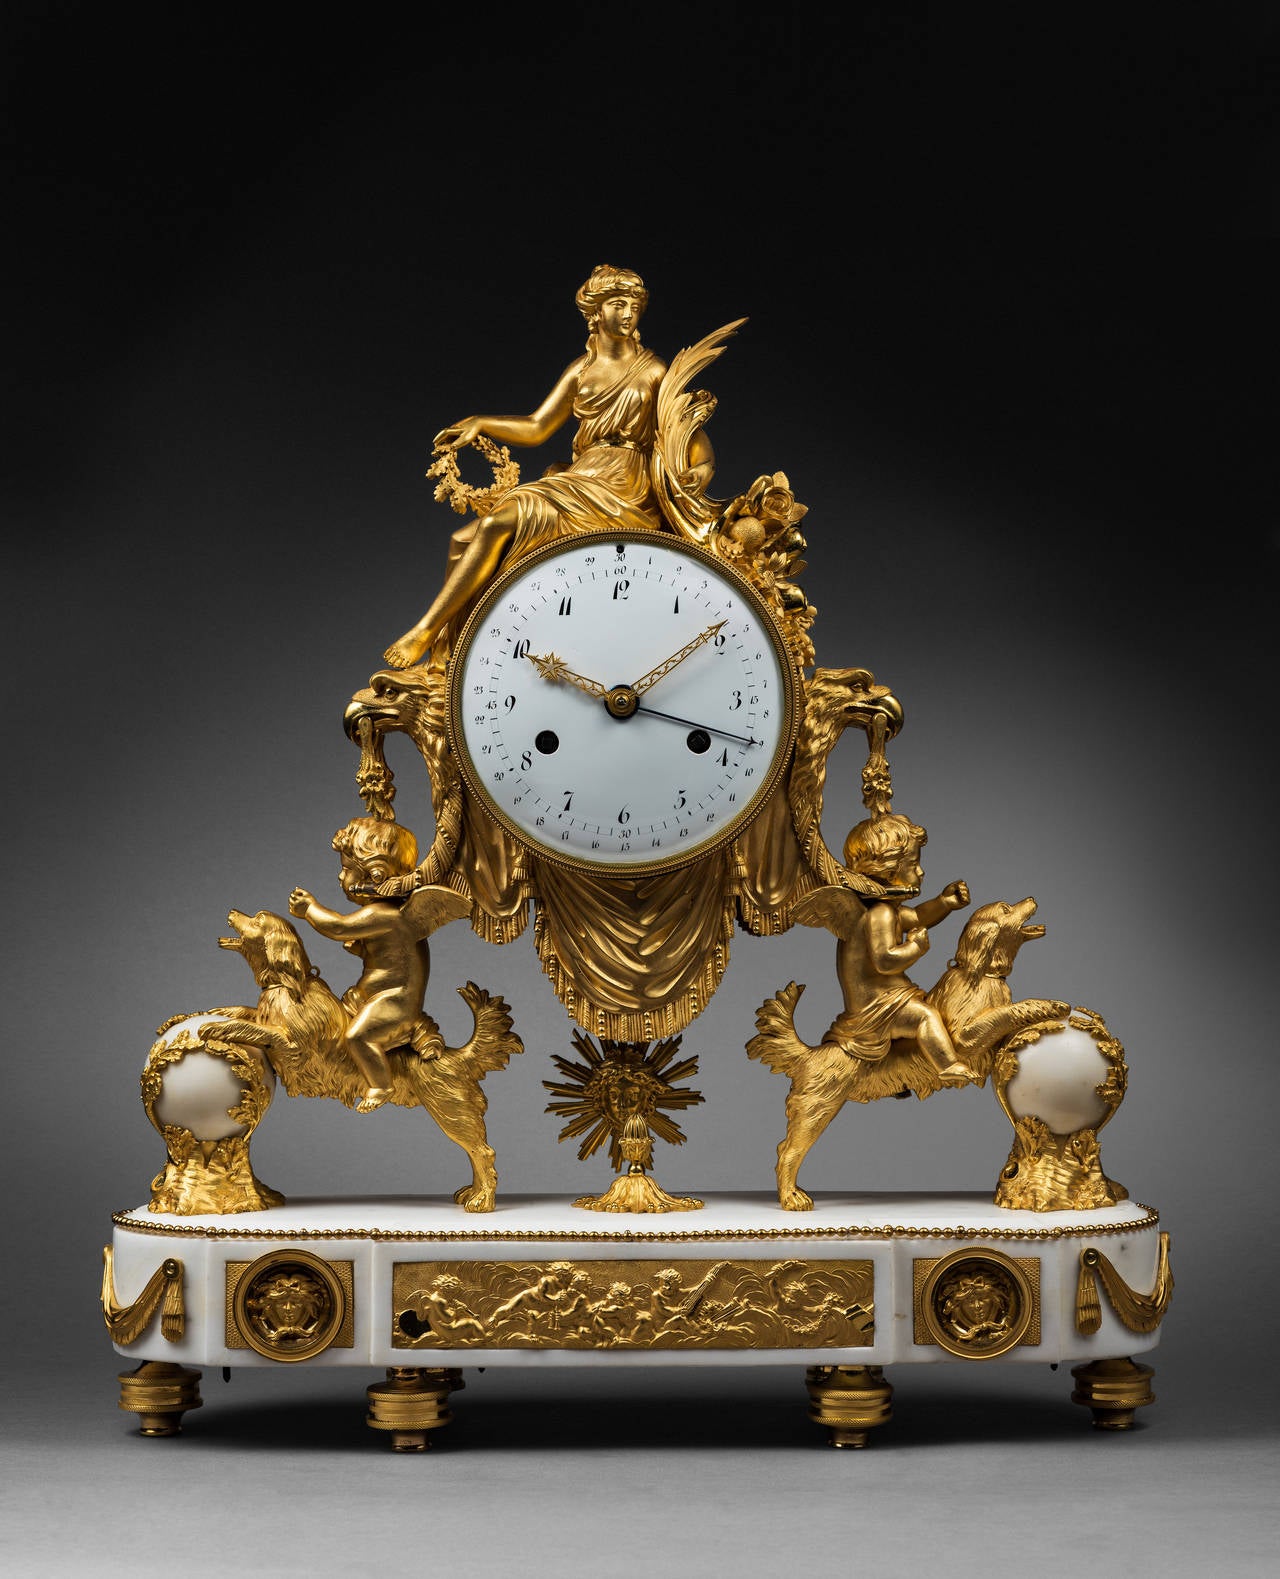 Important Gilt Bronze and Marble Mantel Clock

Paris, late Louis XVI period, circa 1785-1790
Height 53.5 cm; width 50 cm; depth 13.5 cm

The round enamel dial indicates the hours in Arabic numerals and the fifteen-minute intervals by means of